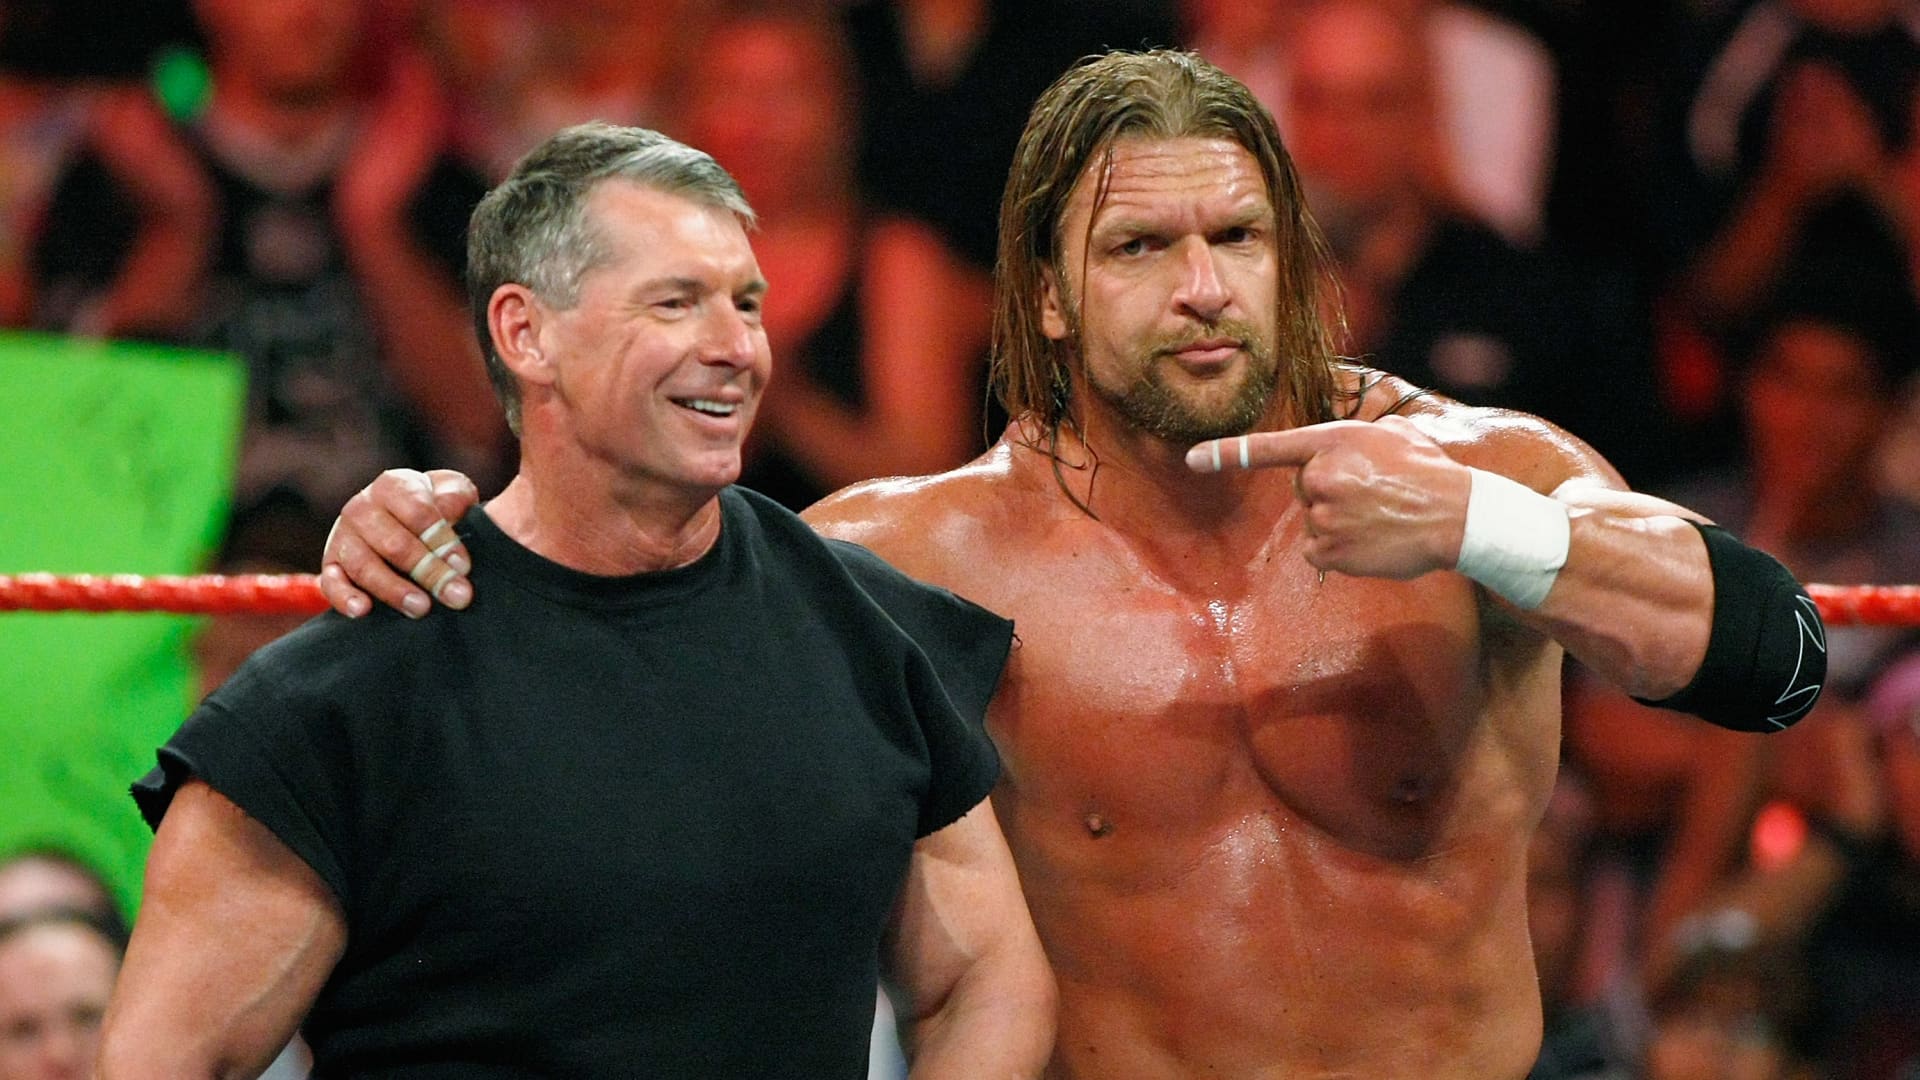 WWE discloses another $5 million in McMahon funds, delays earnings report